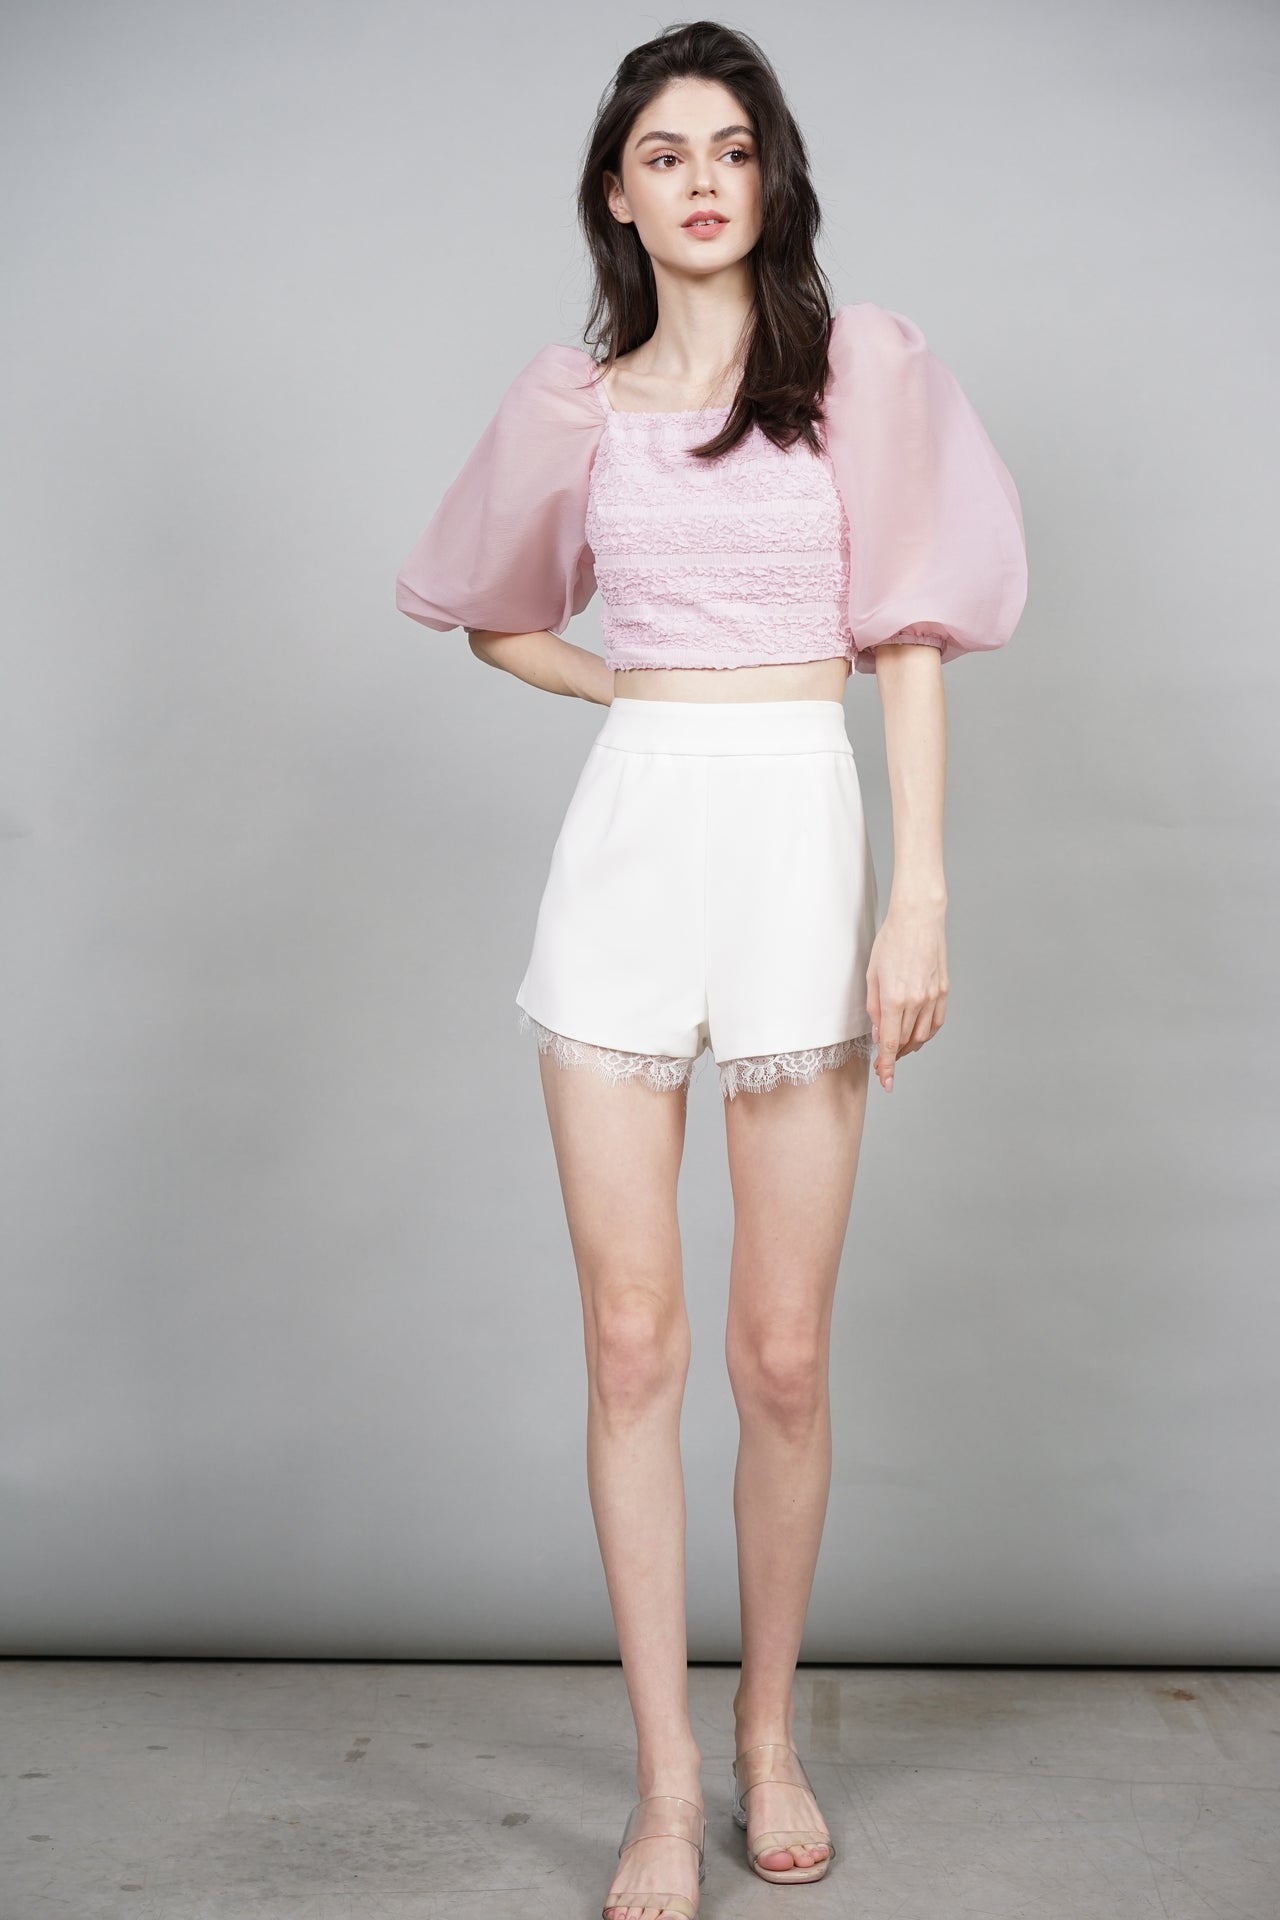 Tylie Puffy Top in Pink - Arriving Soon